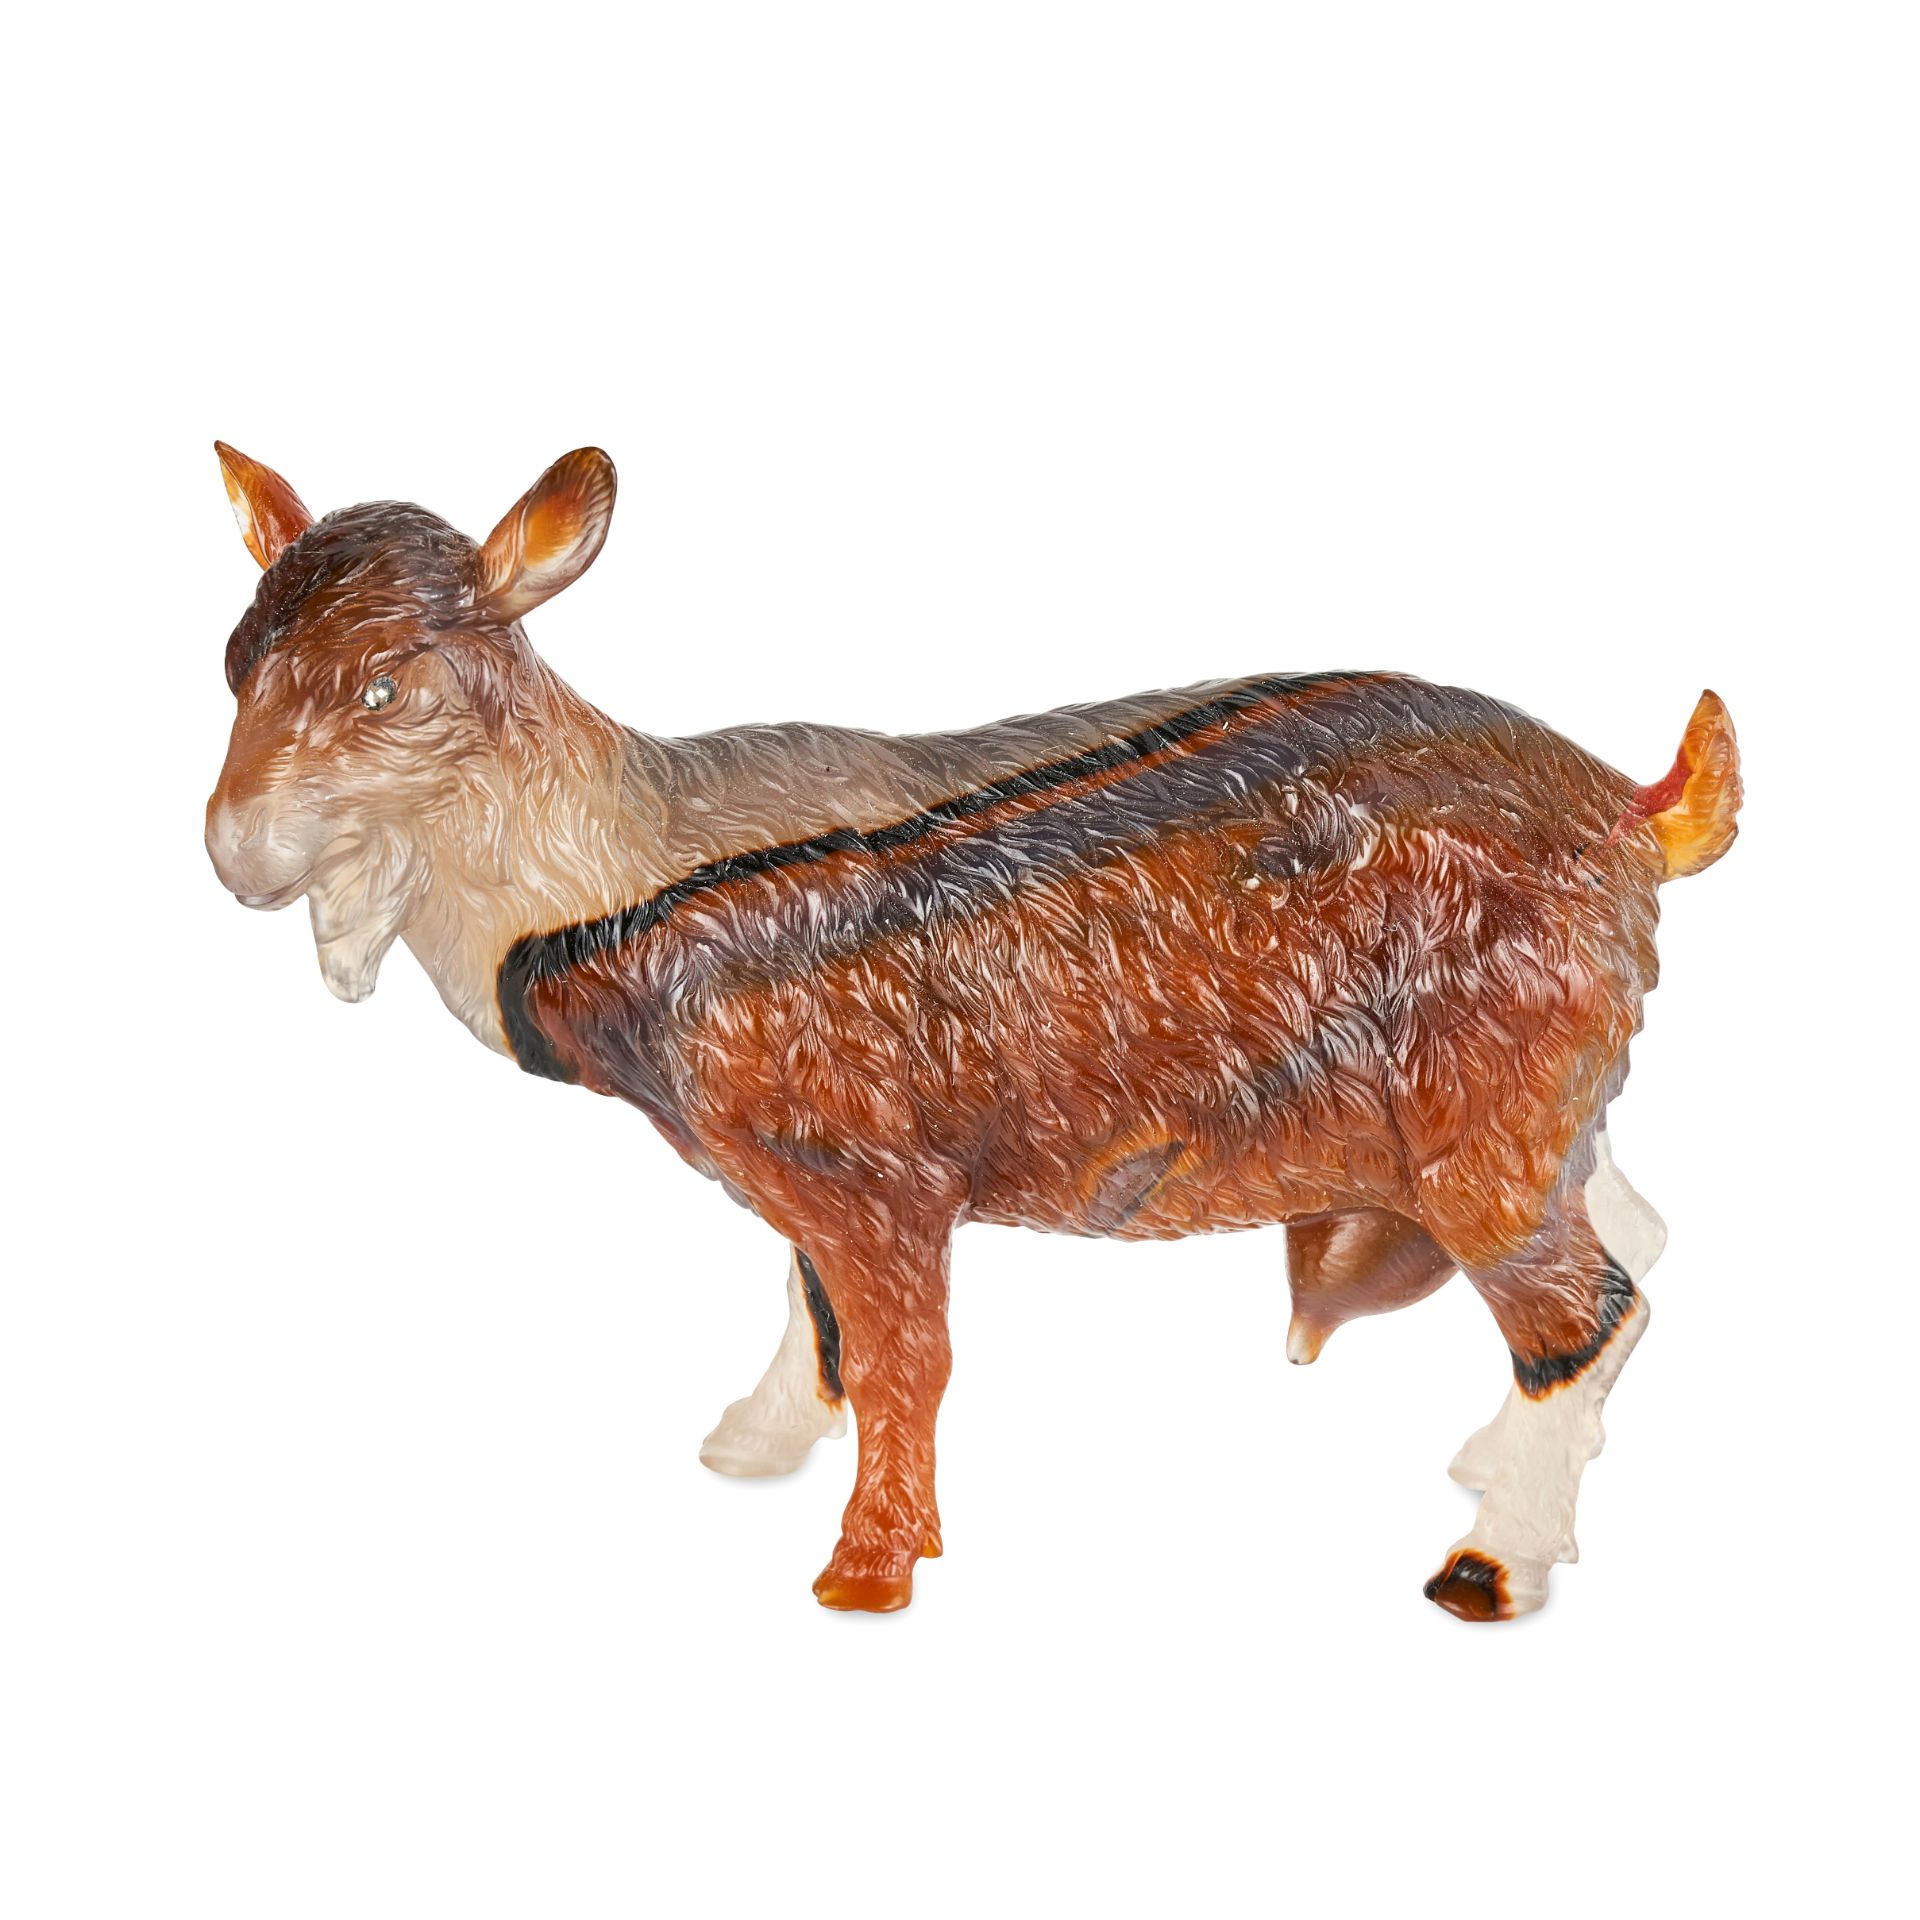 FABERGE, AN EXCEPTIONAL JEWELLED AGATE MODEL OF A SHE GOAT, ST PETERSBURG, CIRCA 1900 - Image 2 of 11